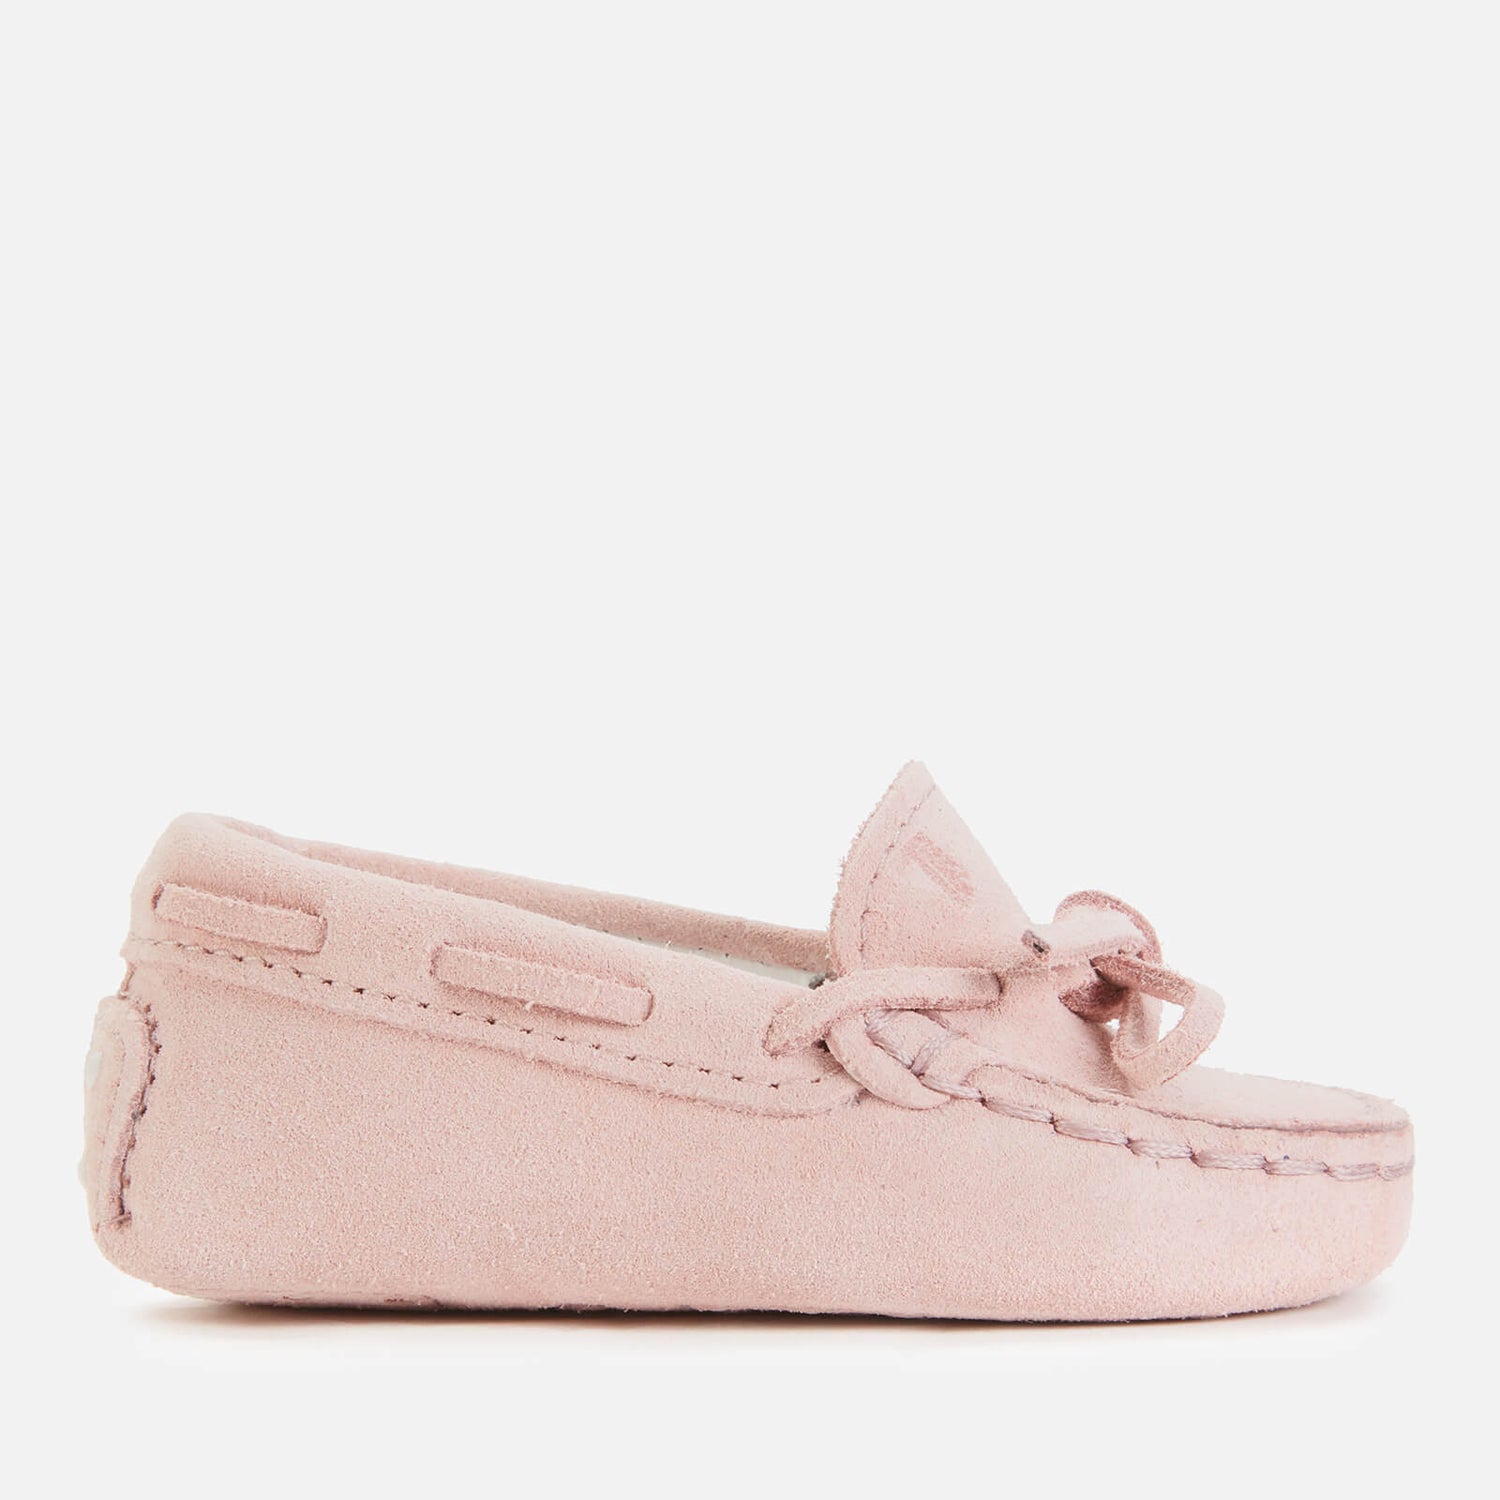 Tods Babys' Suede Mocassin Loafers - Rosa - UK 1 Baby